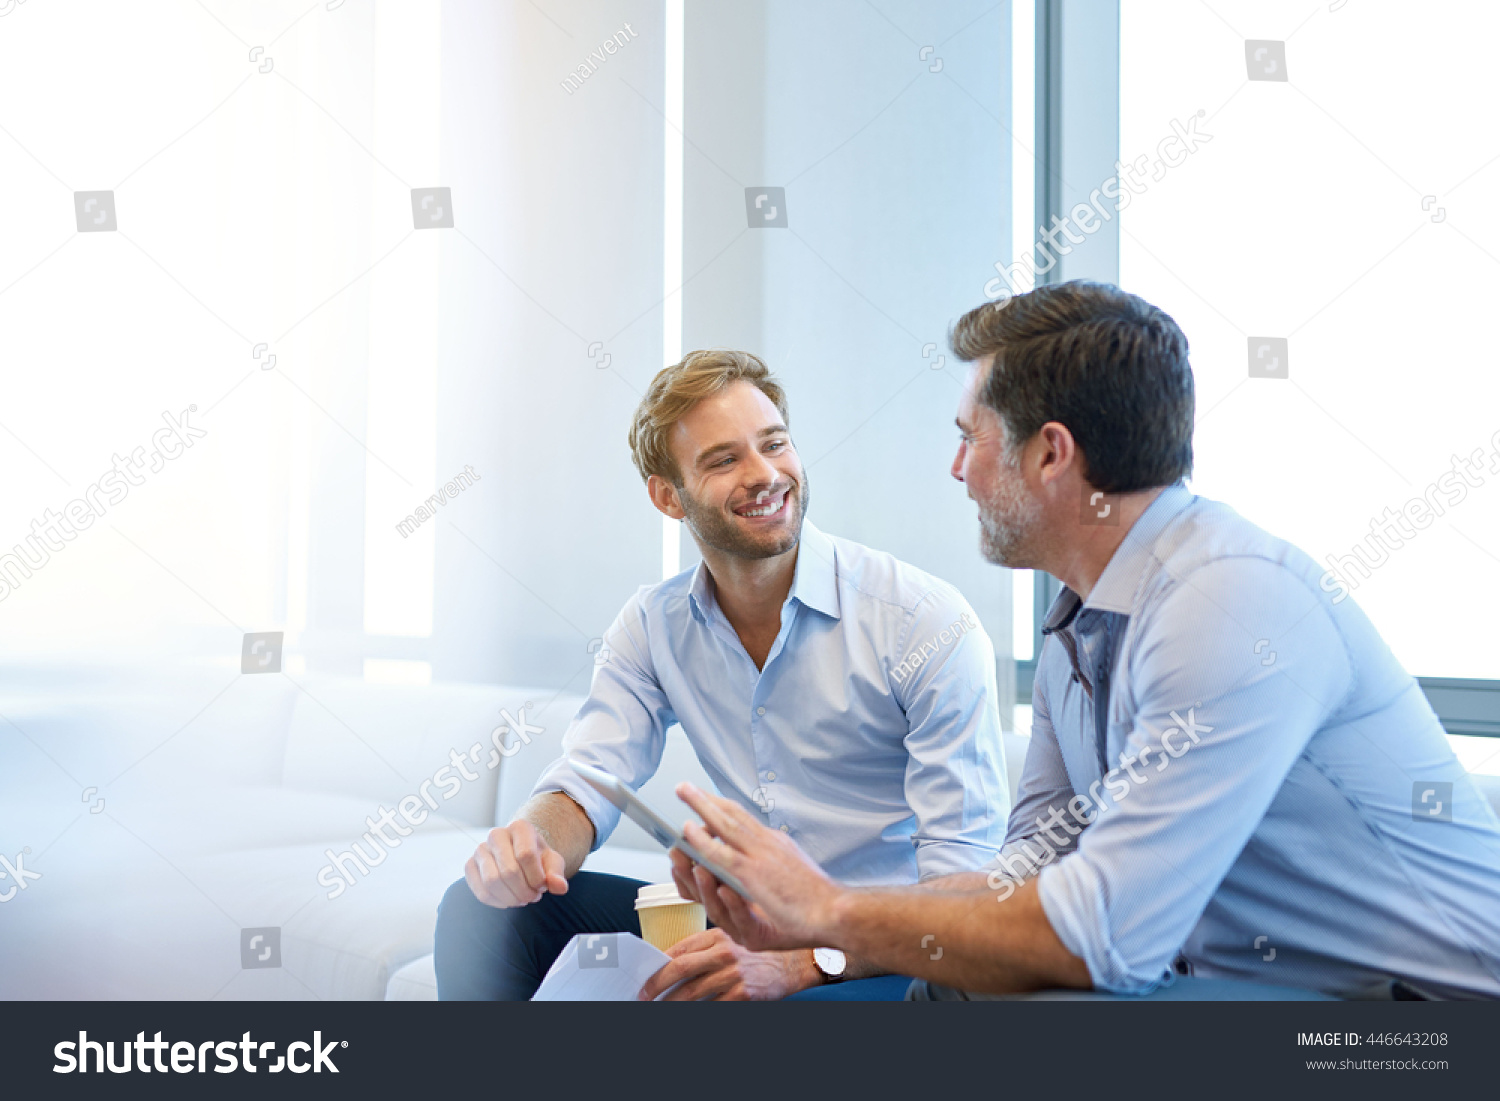 Smiling young businessman enjoying a positive conversation with a mature business partner in a modern space with large windows #446643208